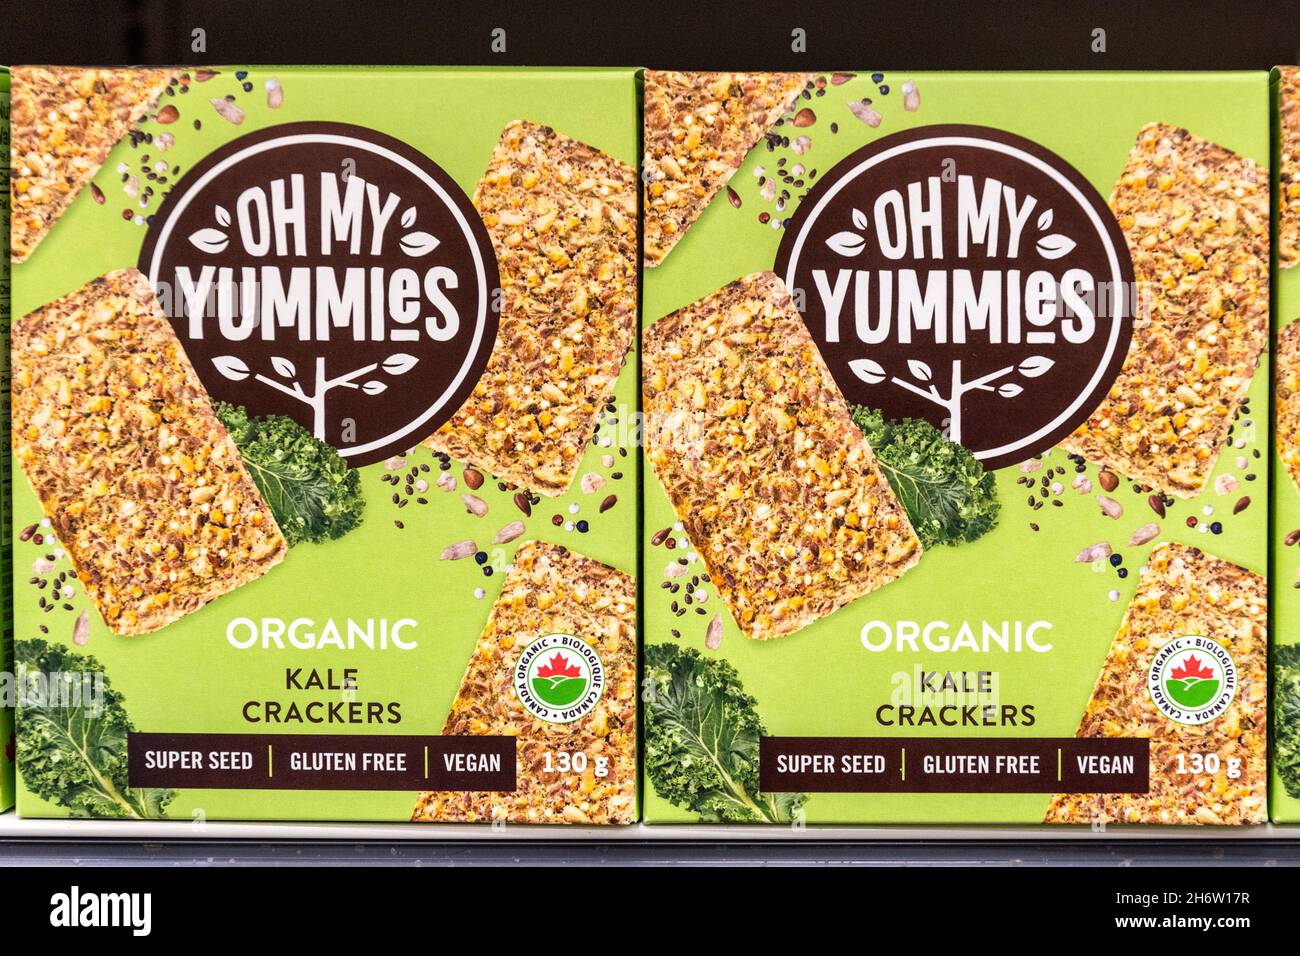 https://c8.alamy.com/comp/2H6W17R/boxes-of-oh-my-yummies-organic-kale-crackers-seen-in-a-grocery-store-shelfnov-18-2021-2H6W17R.jpg